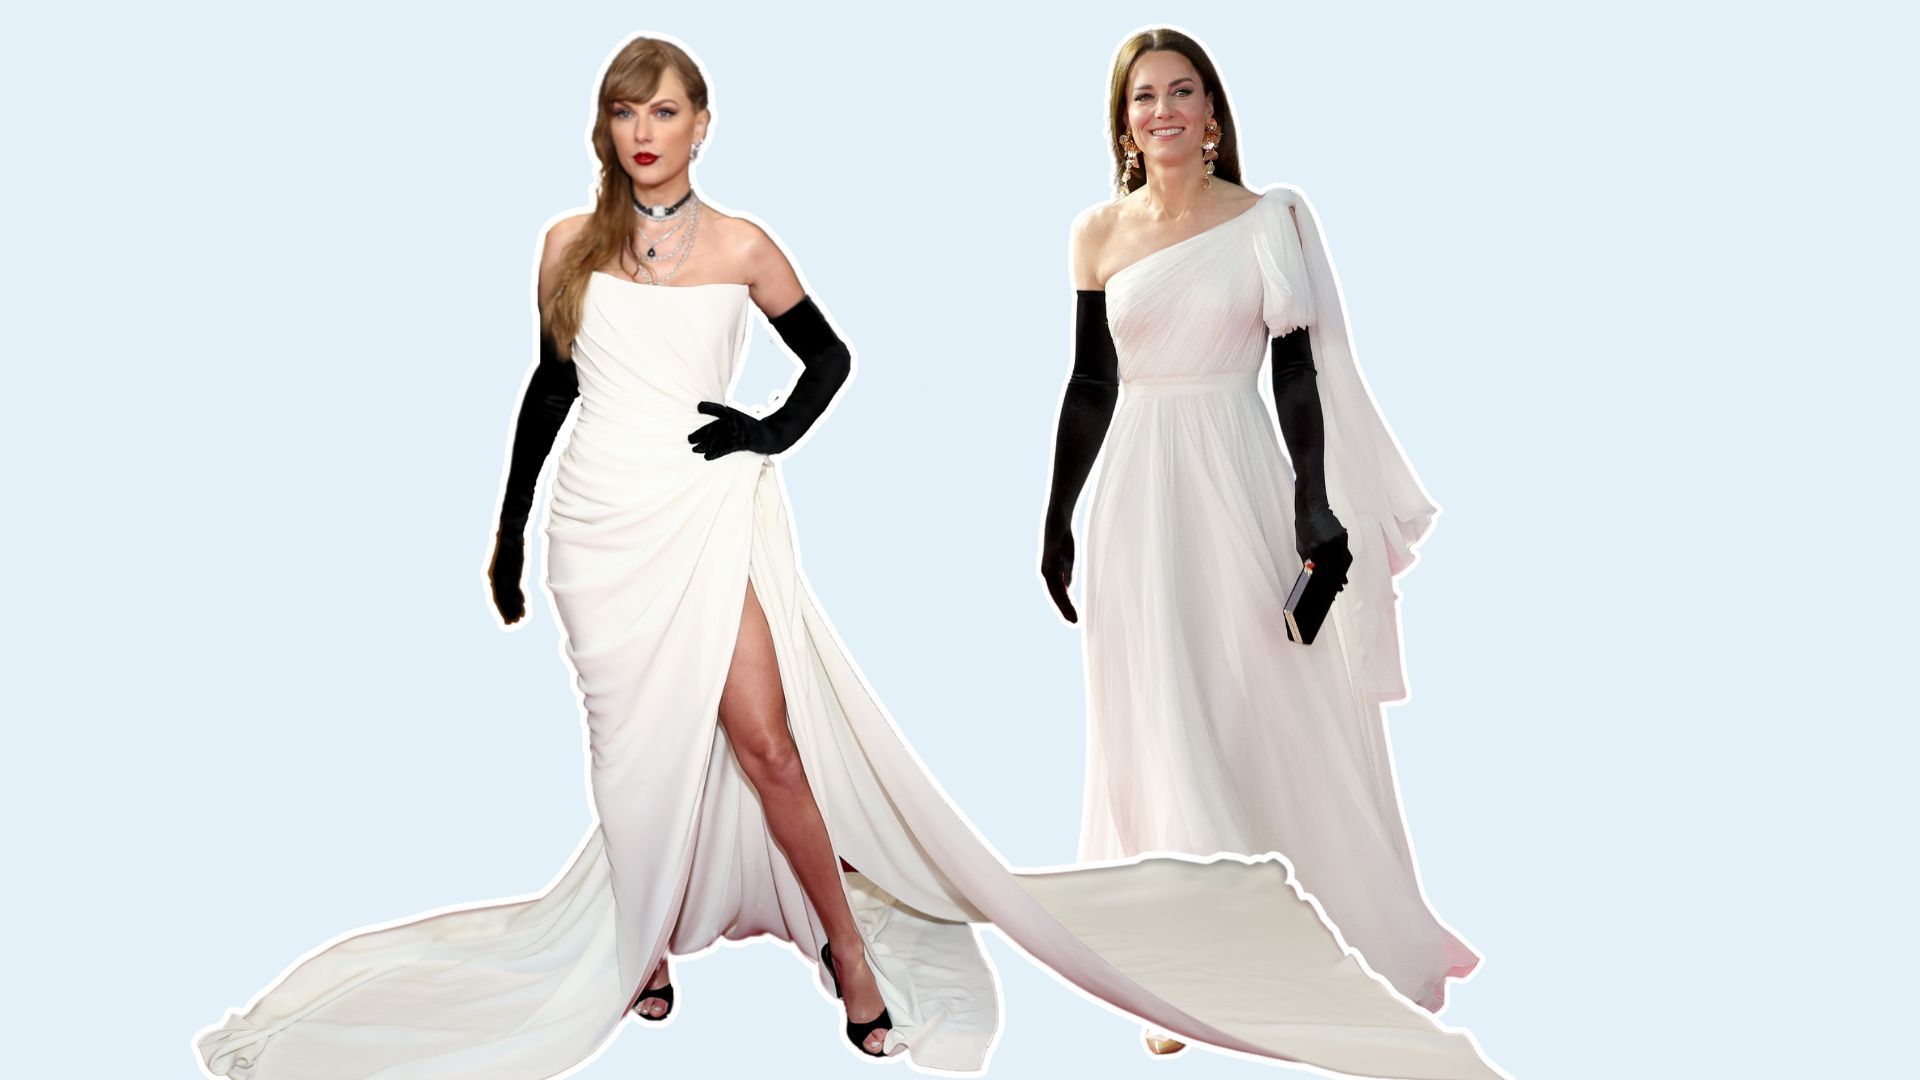 Taylor Swift dressing like Kate Middleton in a whilte dress and black opera gloves